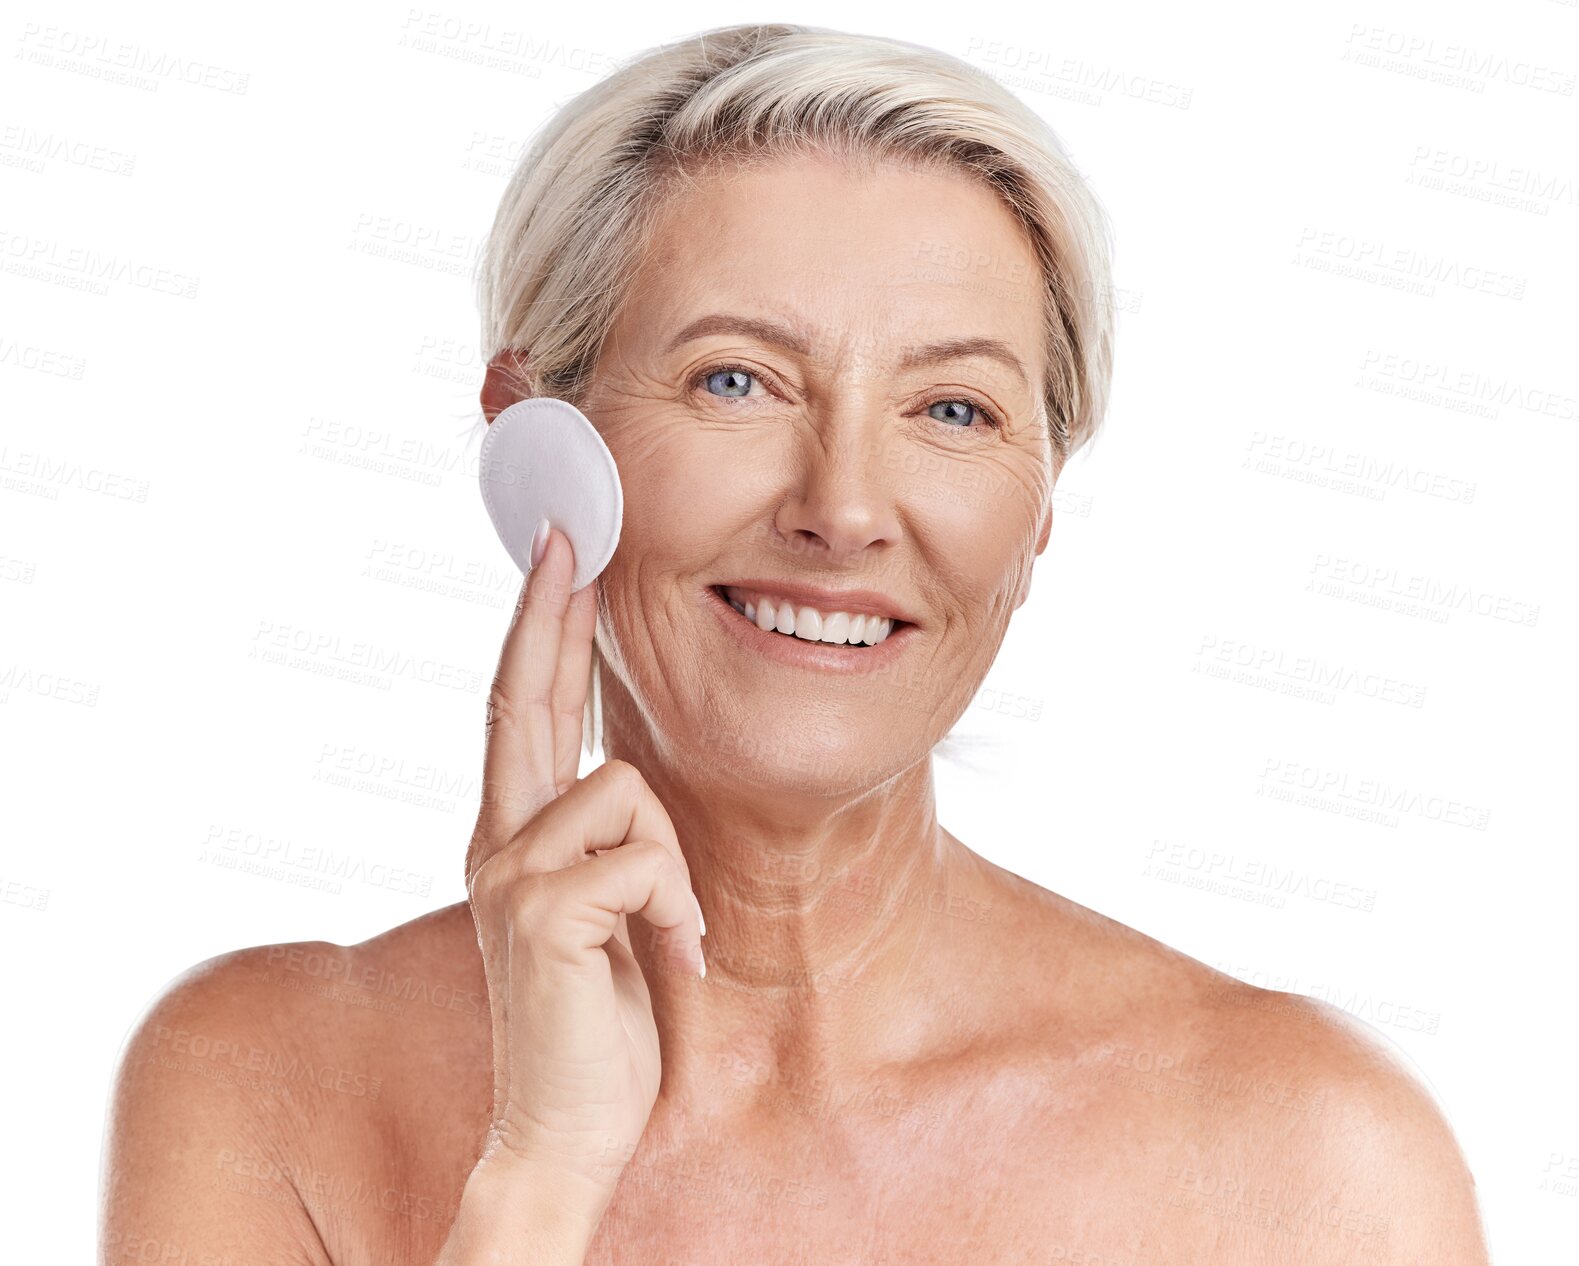 Buy stock photo Happy senior woman, portrait and cotton pad for makeup removal isolated on a transparent PNG background. Face of elderly or mature female person with smile for facial cleaning, beauty or skincare